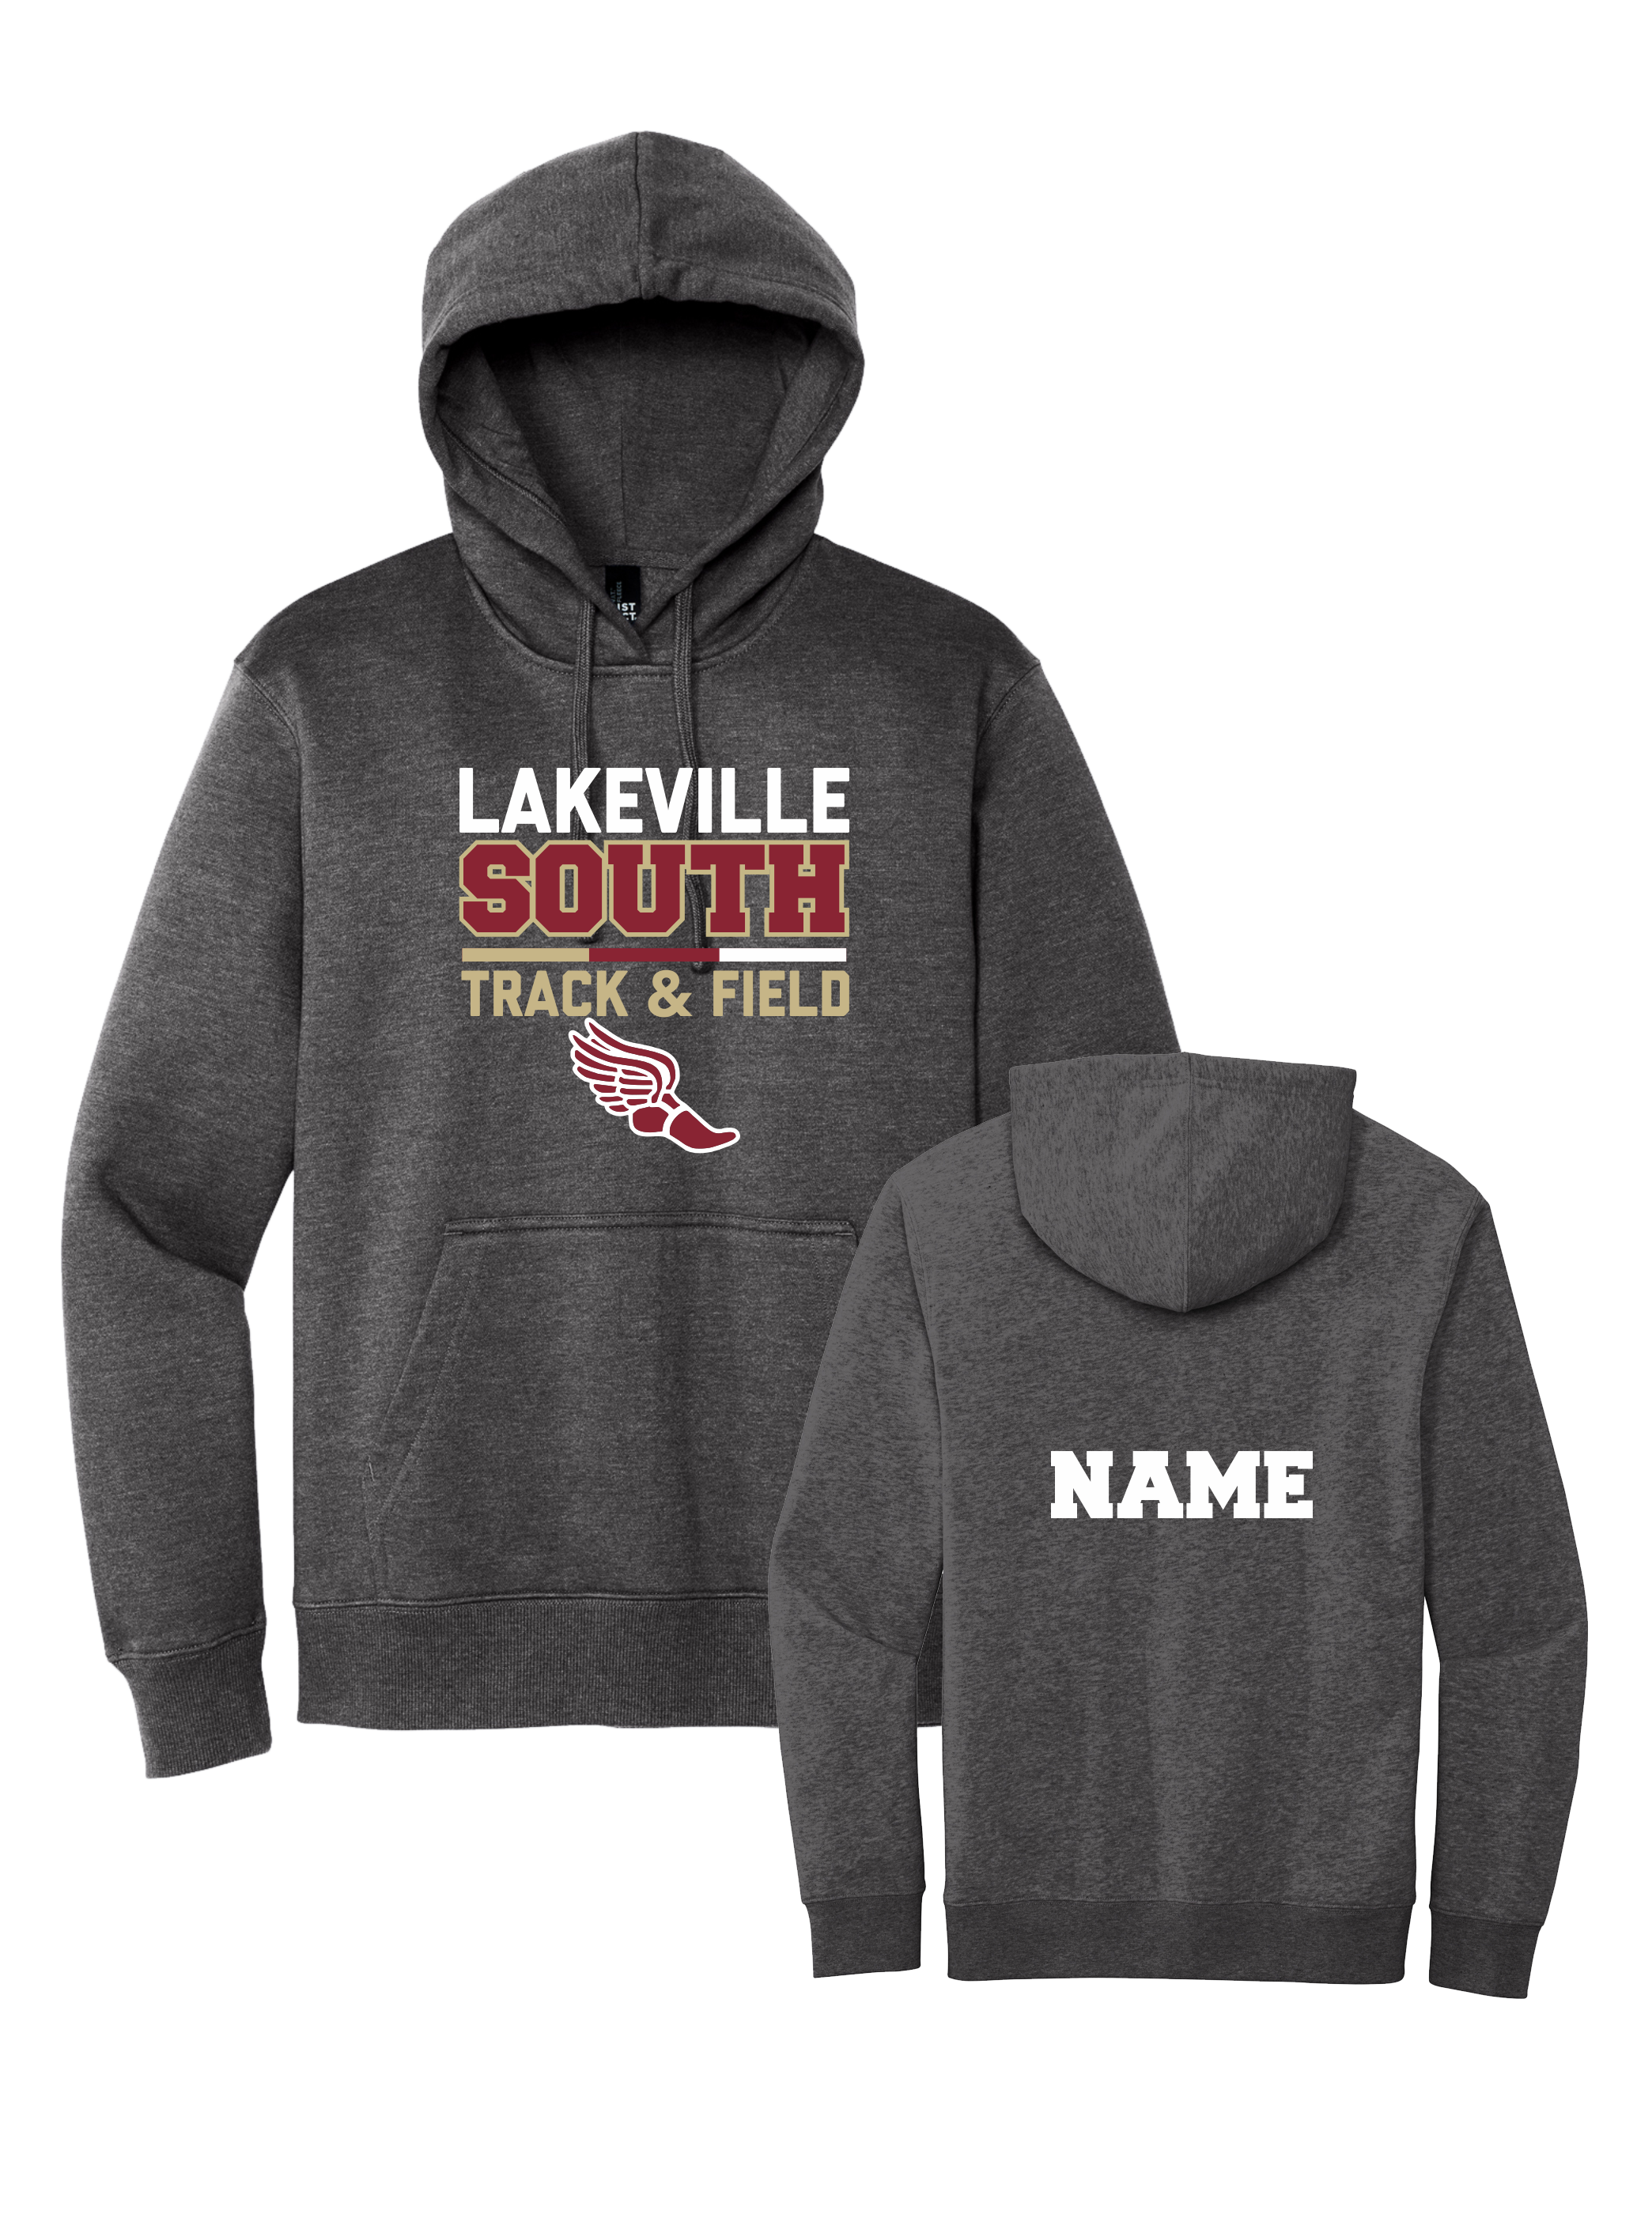 Lakeville South Track & Field Hoodie